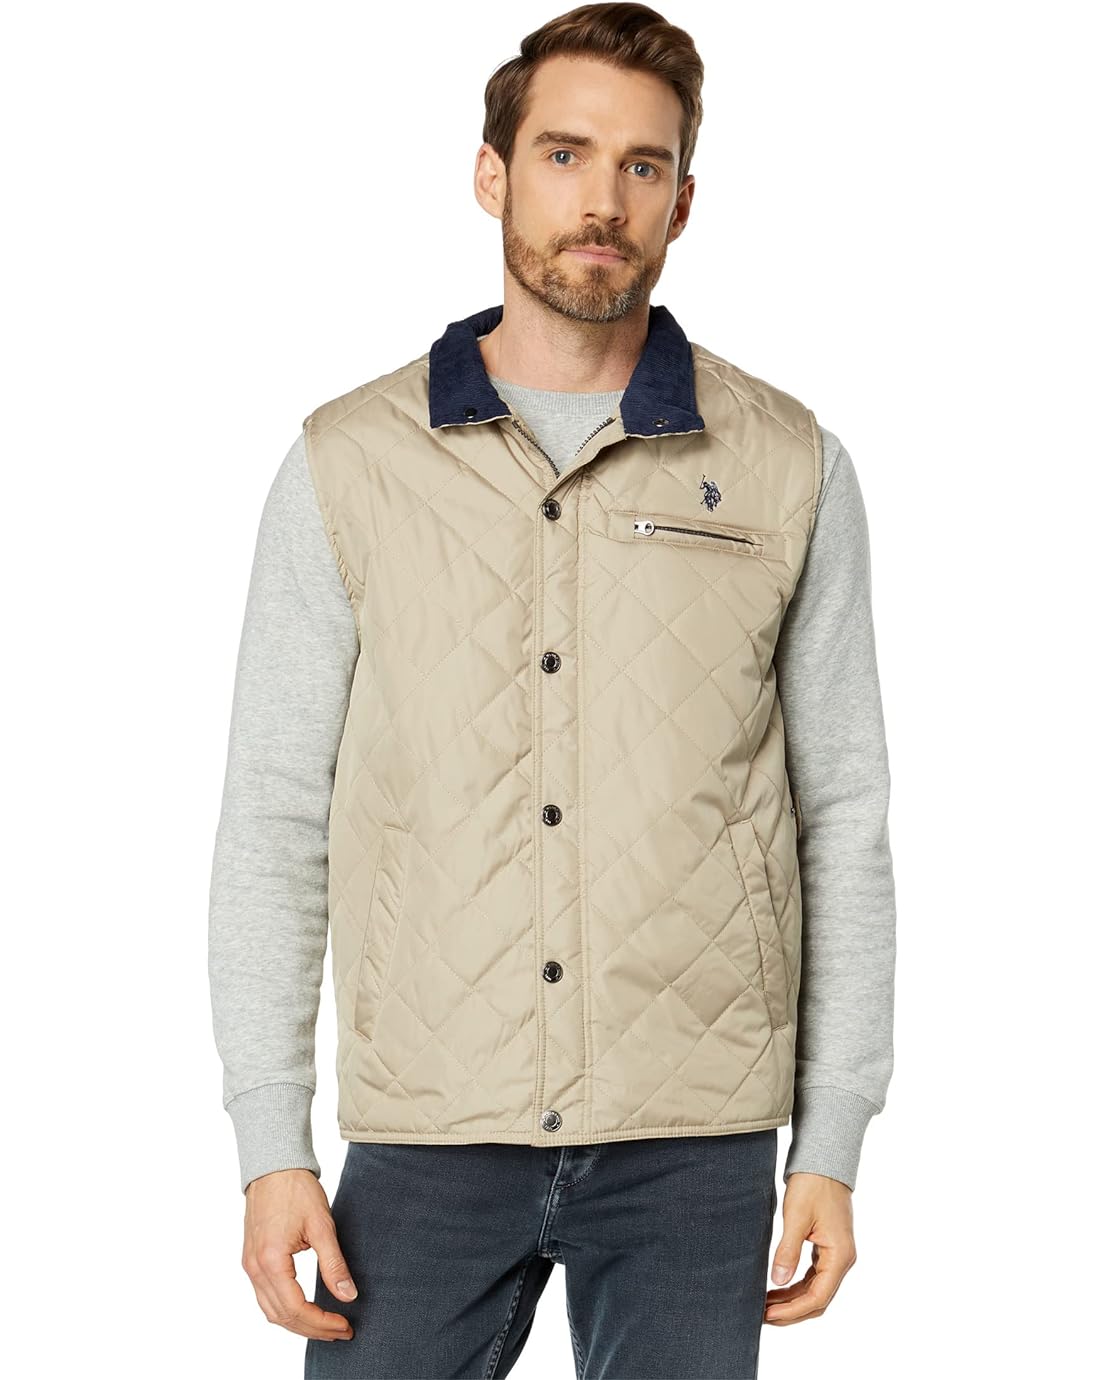 U.S. POLO ASSN. Quilted Vest